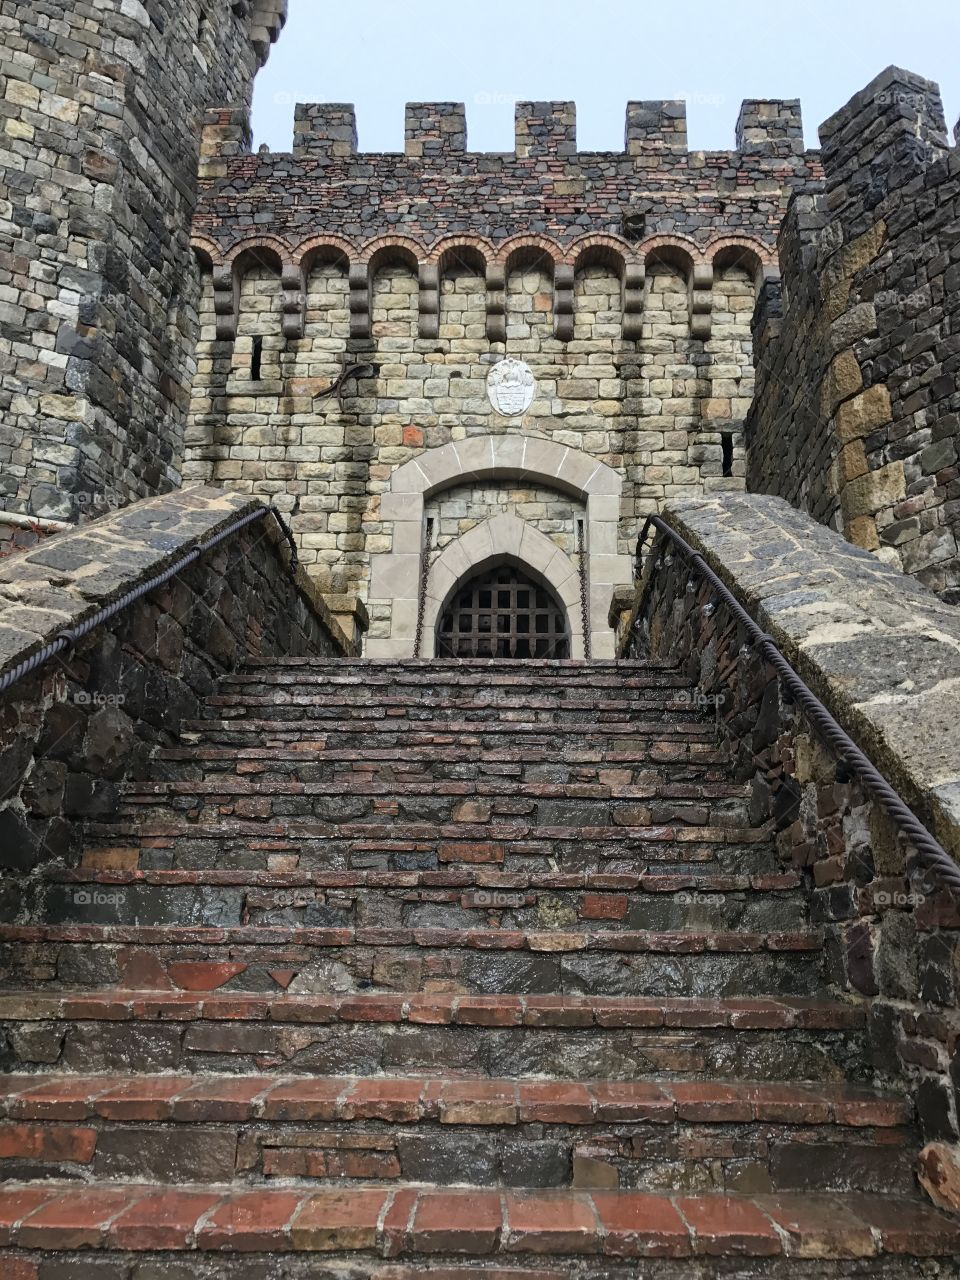 Stairs going up to the gate for castello di amorosa